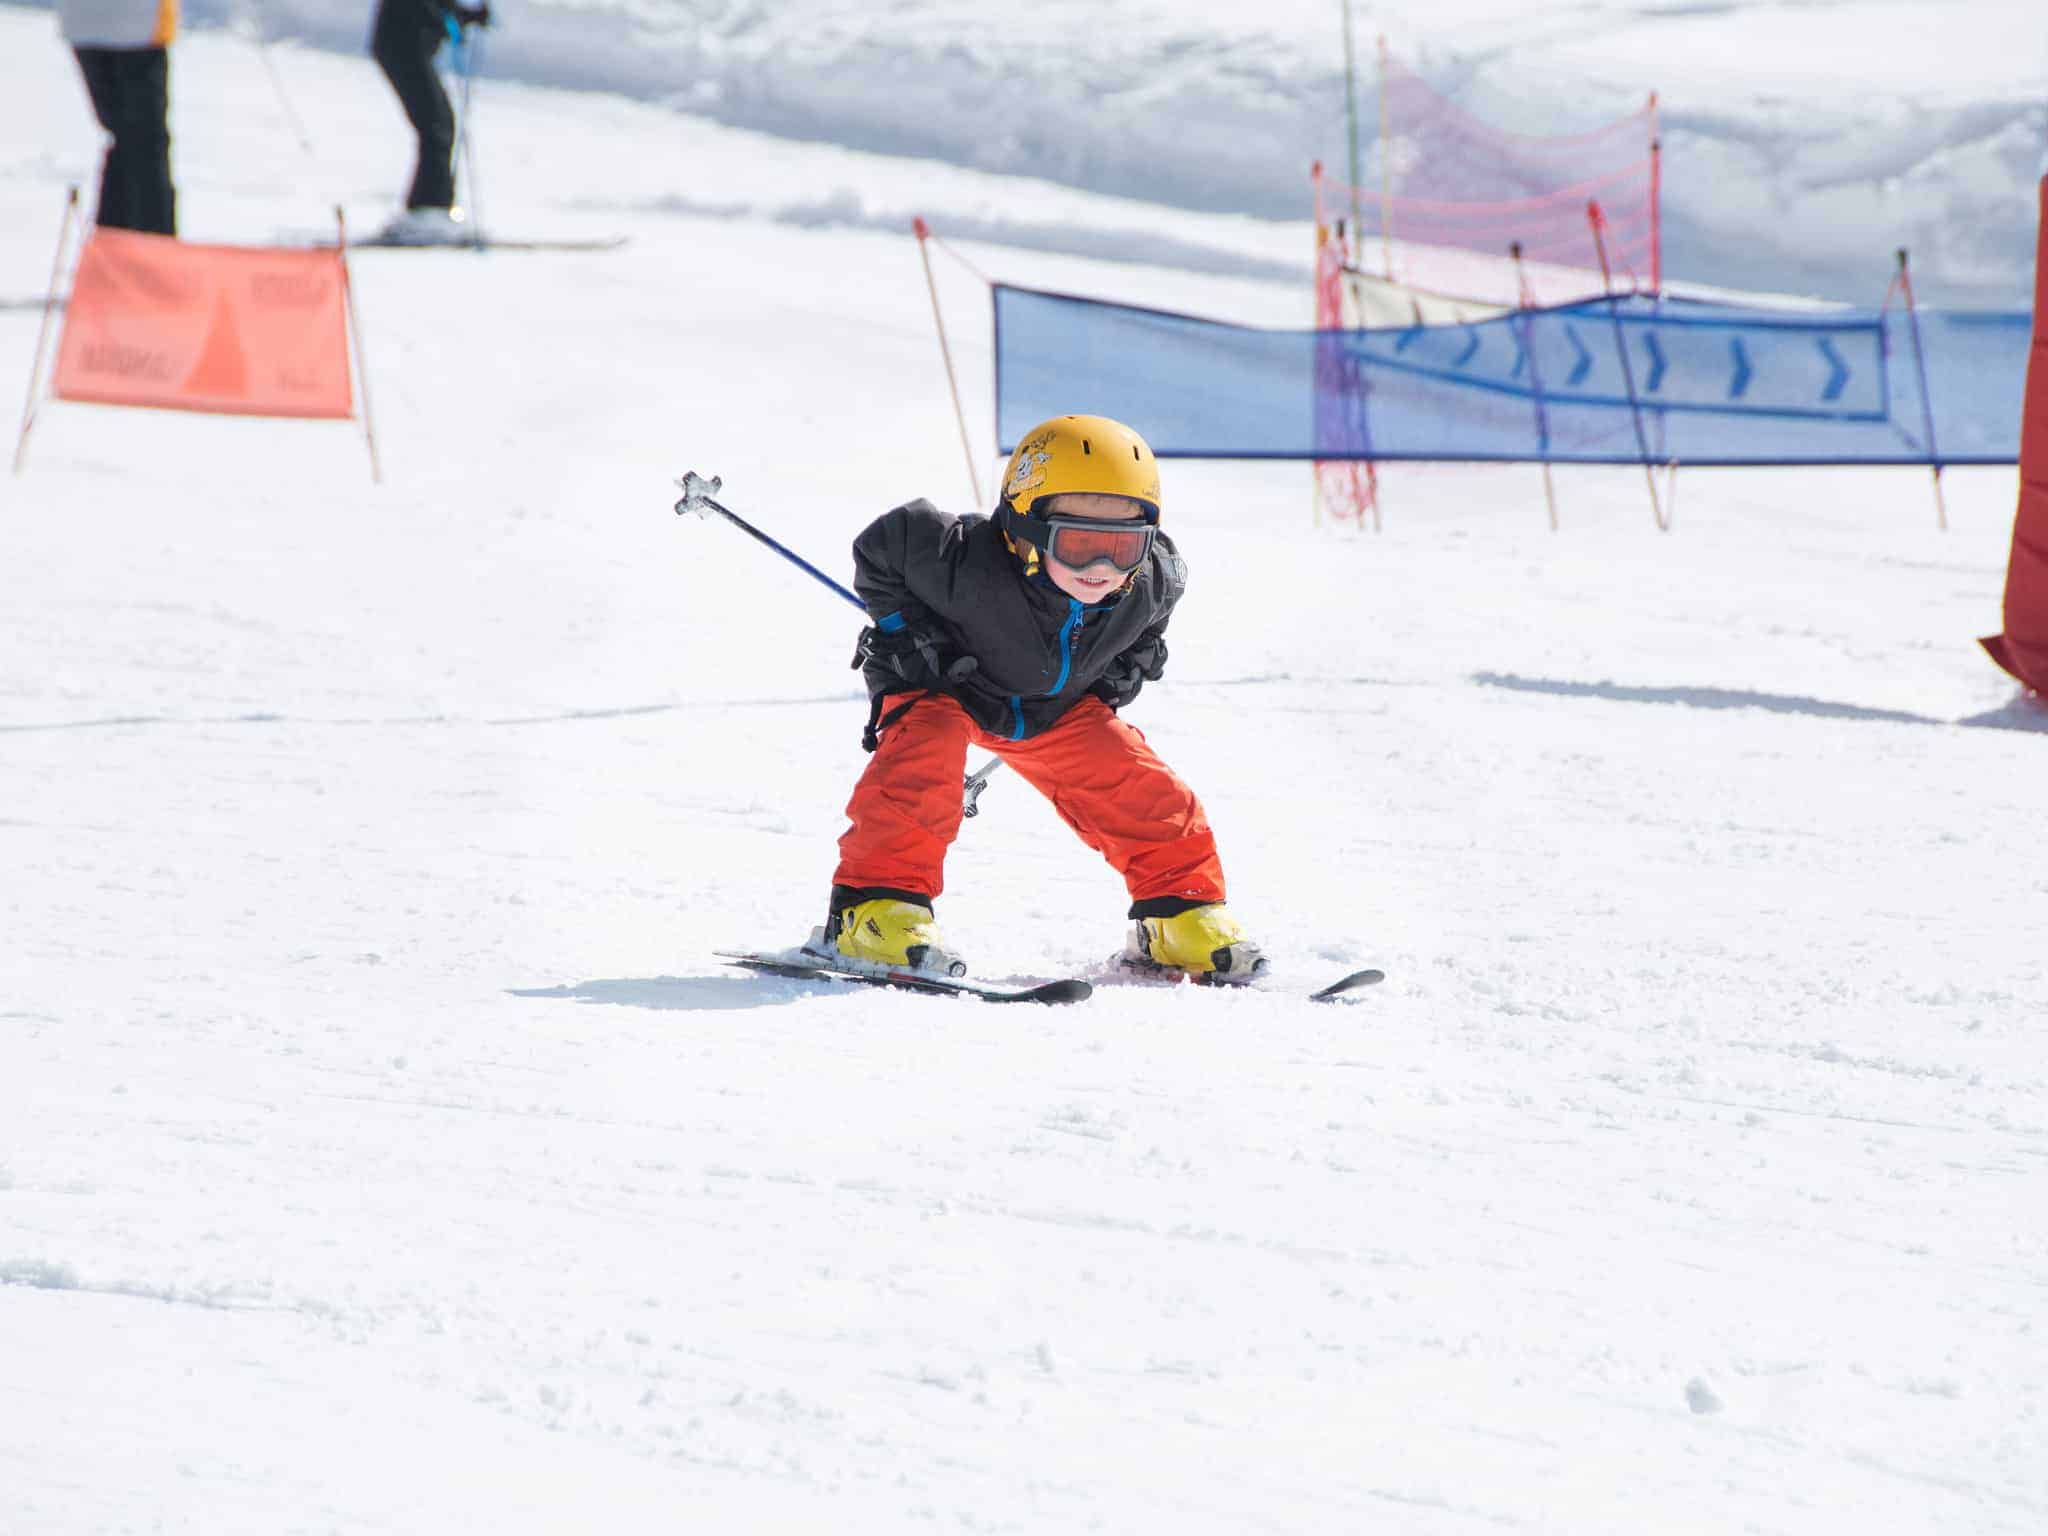 A young child wearing bright colours skiing down the ski slopes.